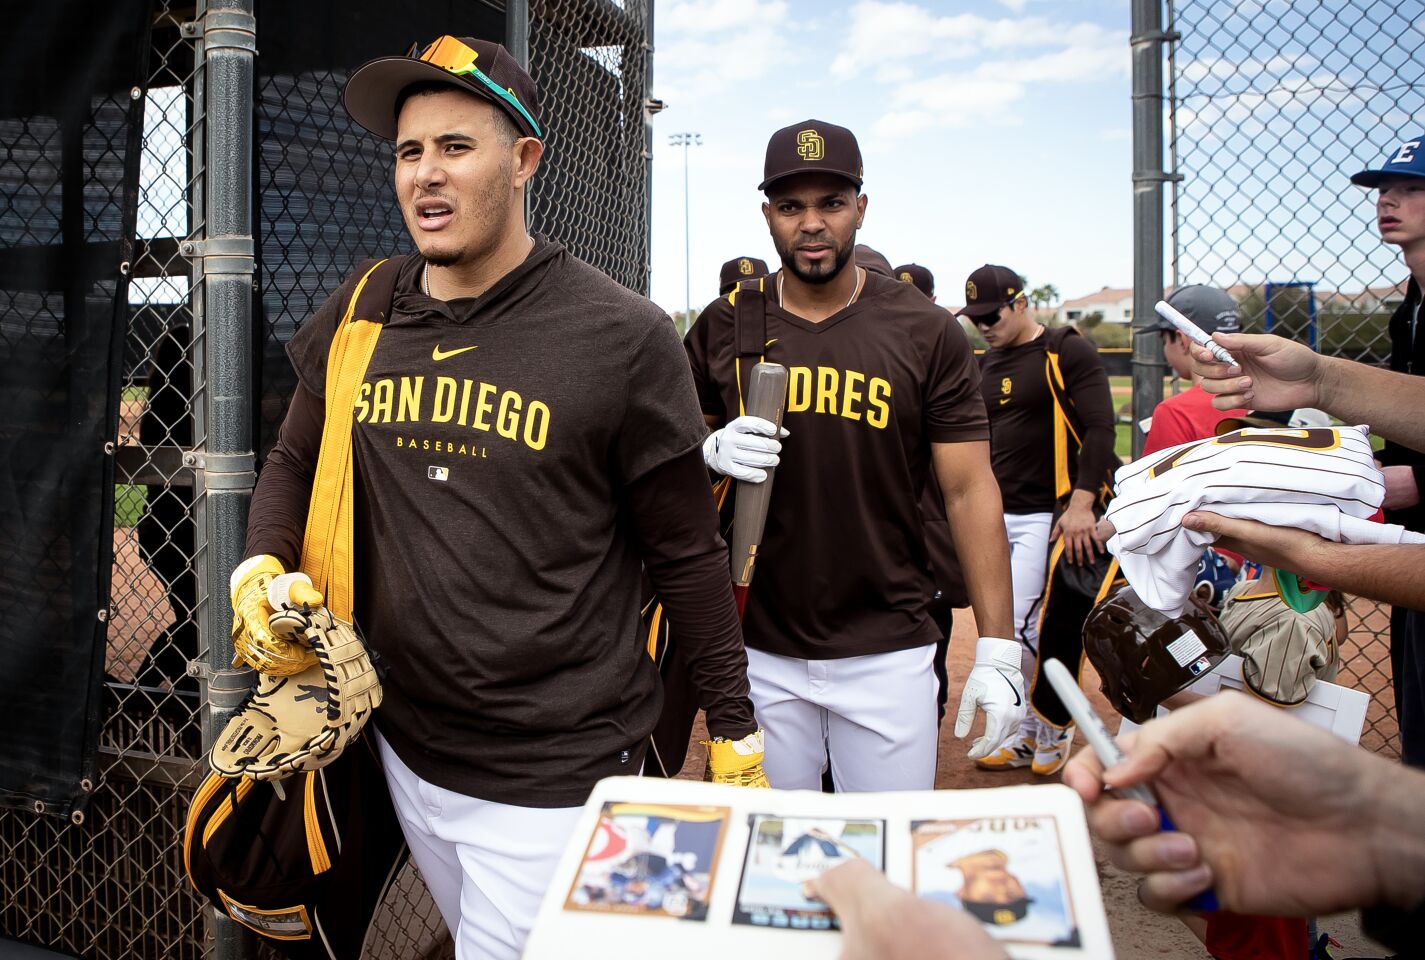 Padres third baseman Manny Machado (13) and shortstop Xander Bogaerts (2) and shortstop Ha-Seong Kim (7) exit the field as fans beg for autographs during a spring training practice at the Peoria Sports Complex on Tuesday, Feb. 21, 2023 in Peoria, AZ.